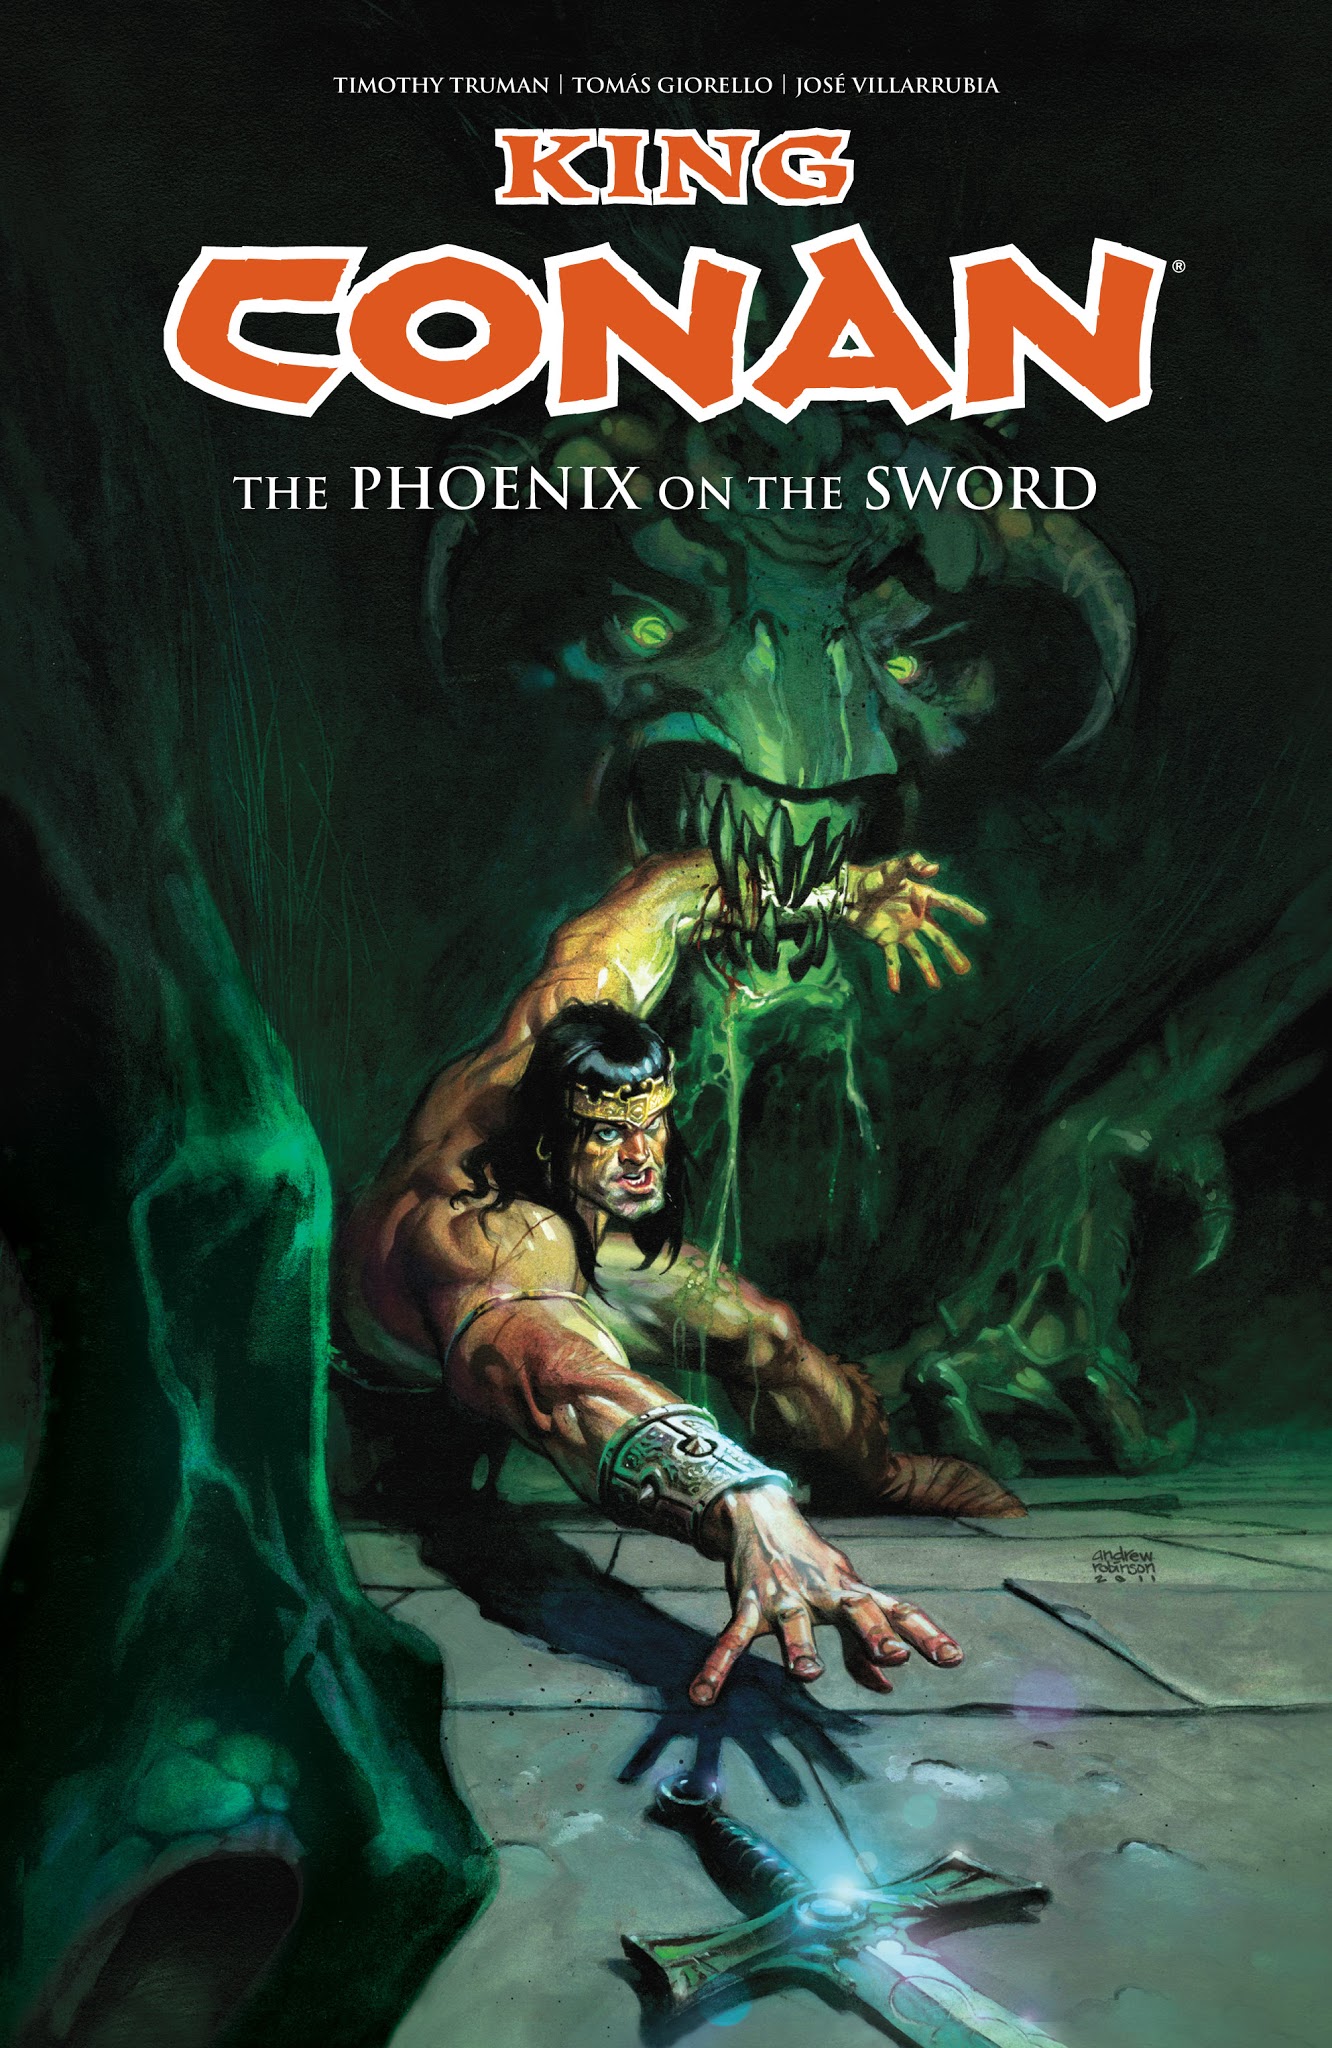 Read online King Conan: The Phoenix on the Sword comic -  Issue # TPB - 1